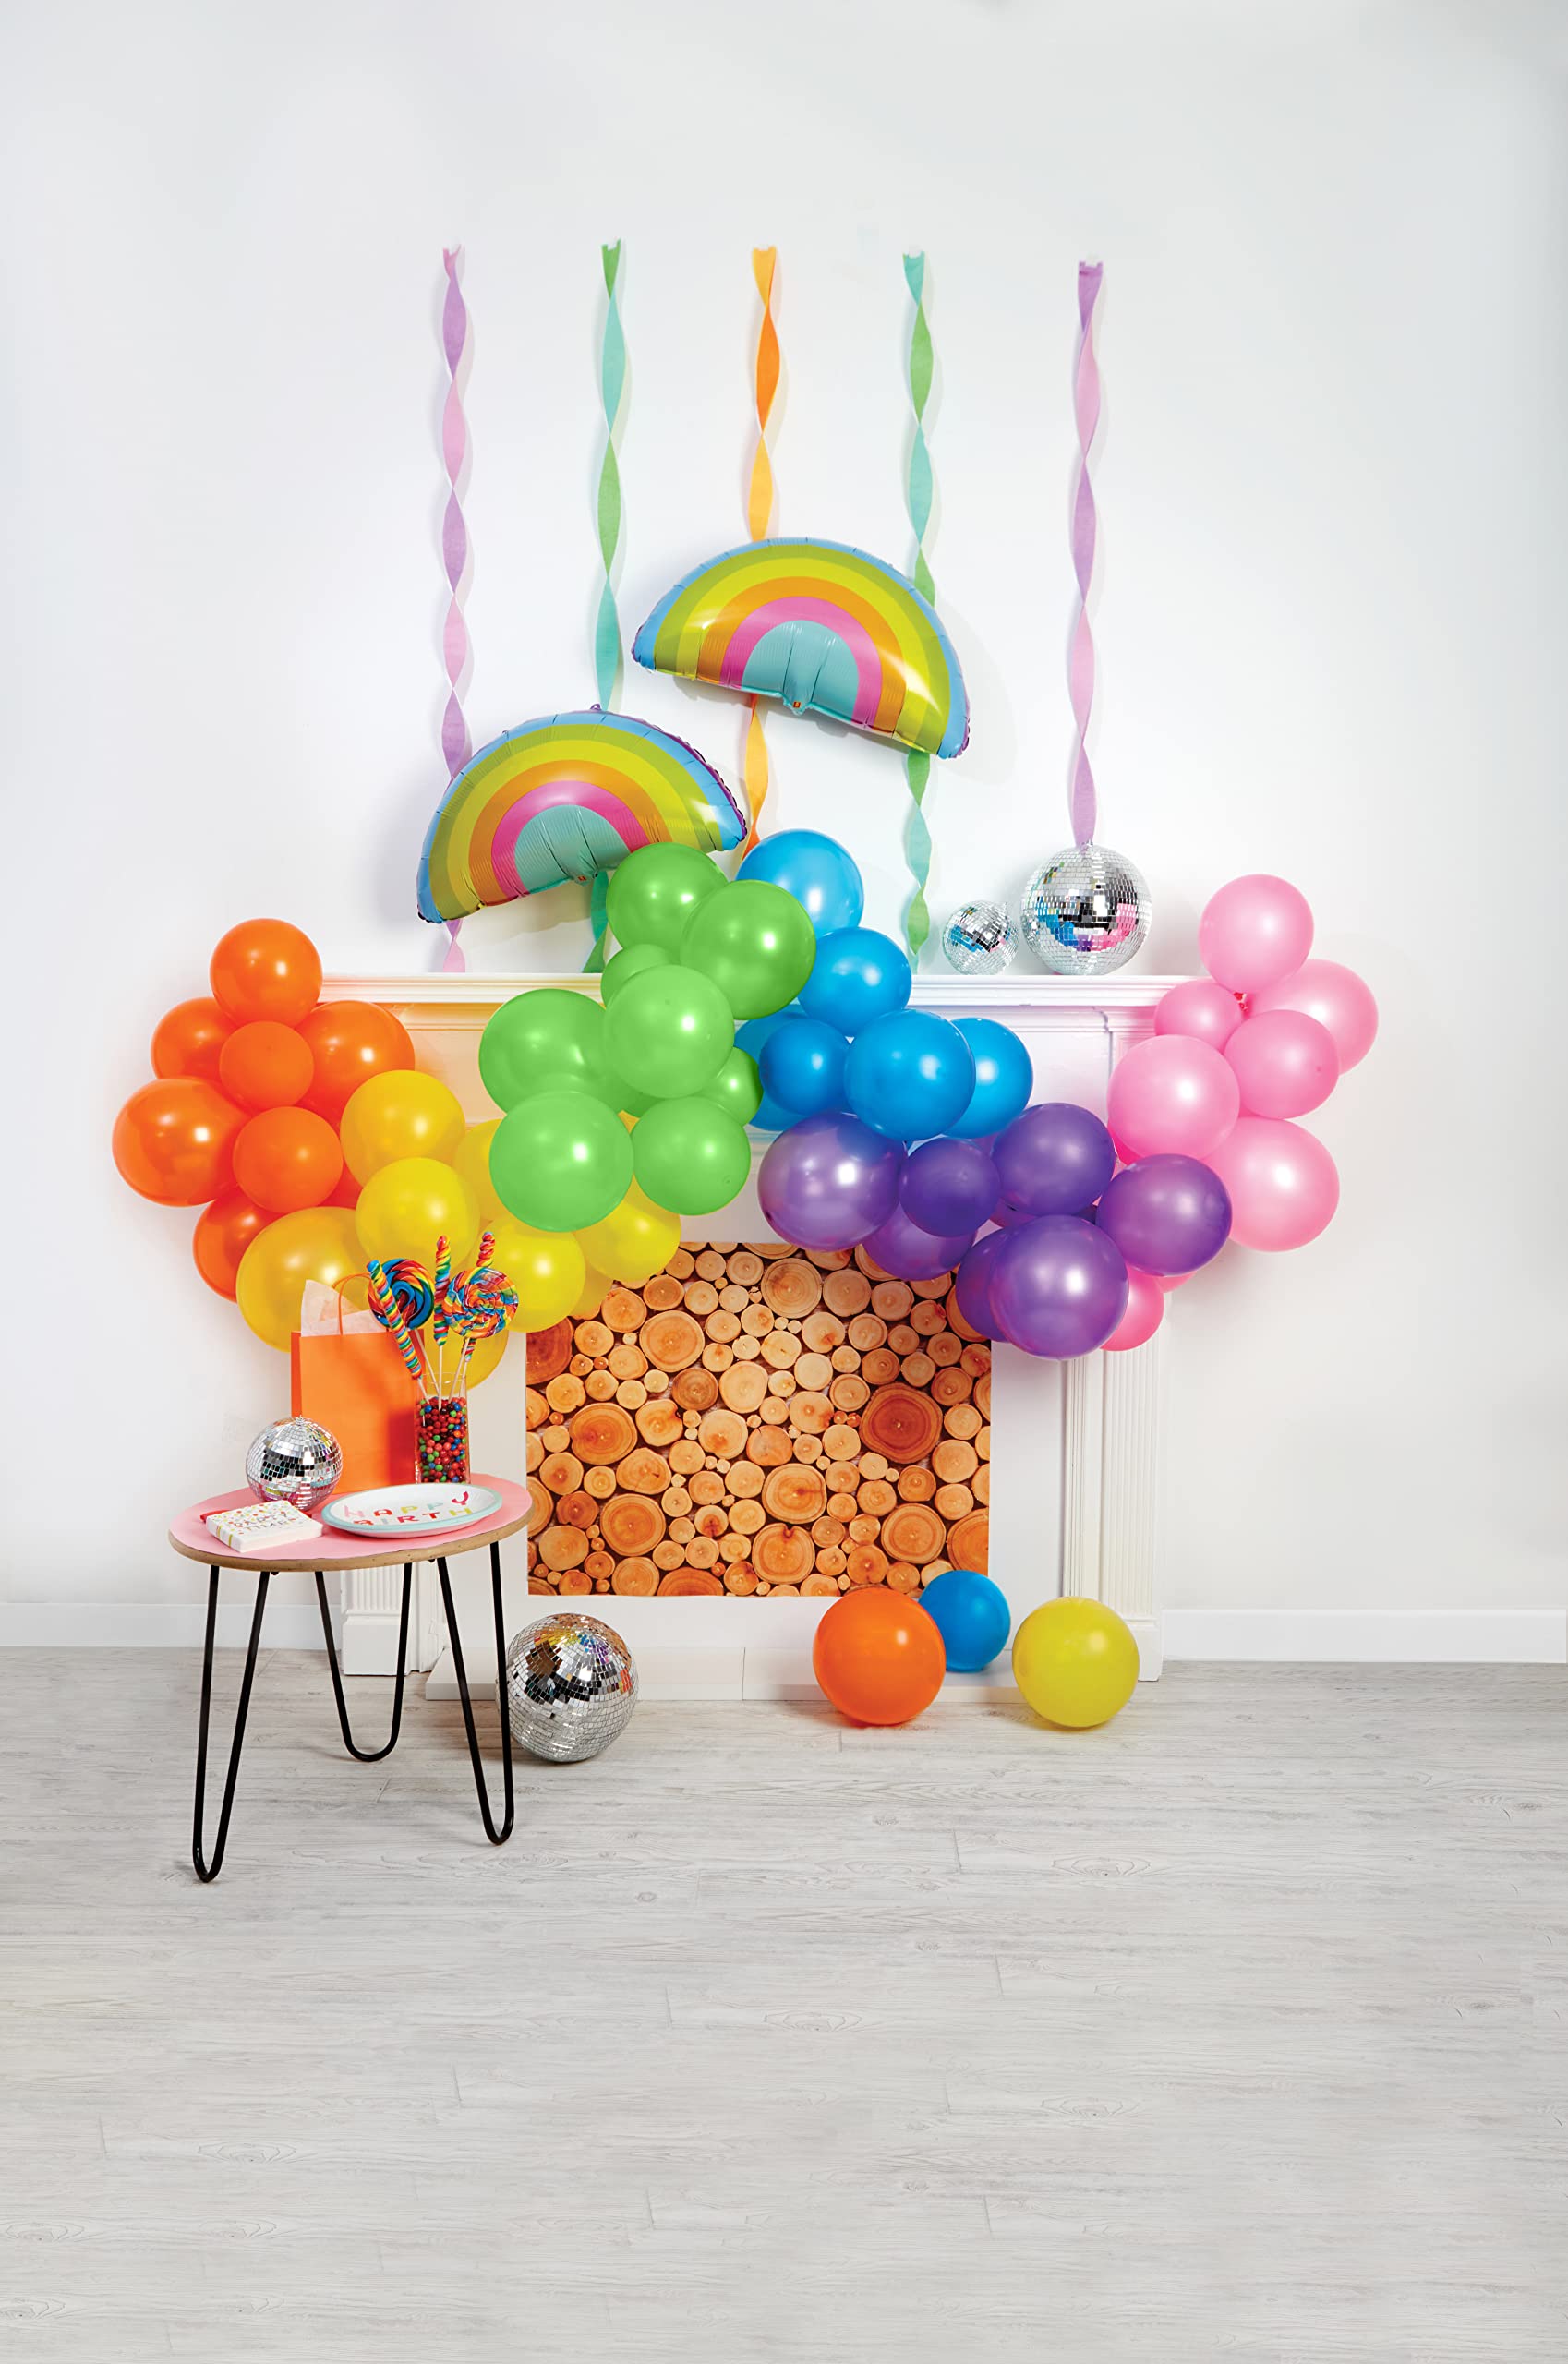 C.R. Gibson CBGM-25271 Kailo Chic, Over the Rainbow Birthday Celebration Balloon Arch Kit, 16 Foot Arch, Multicolor, 144pcs